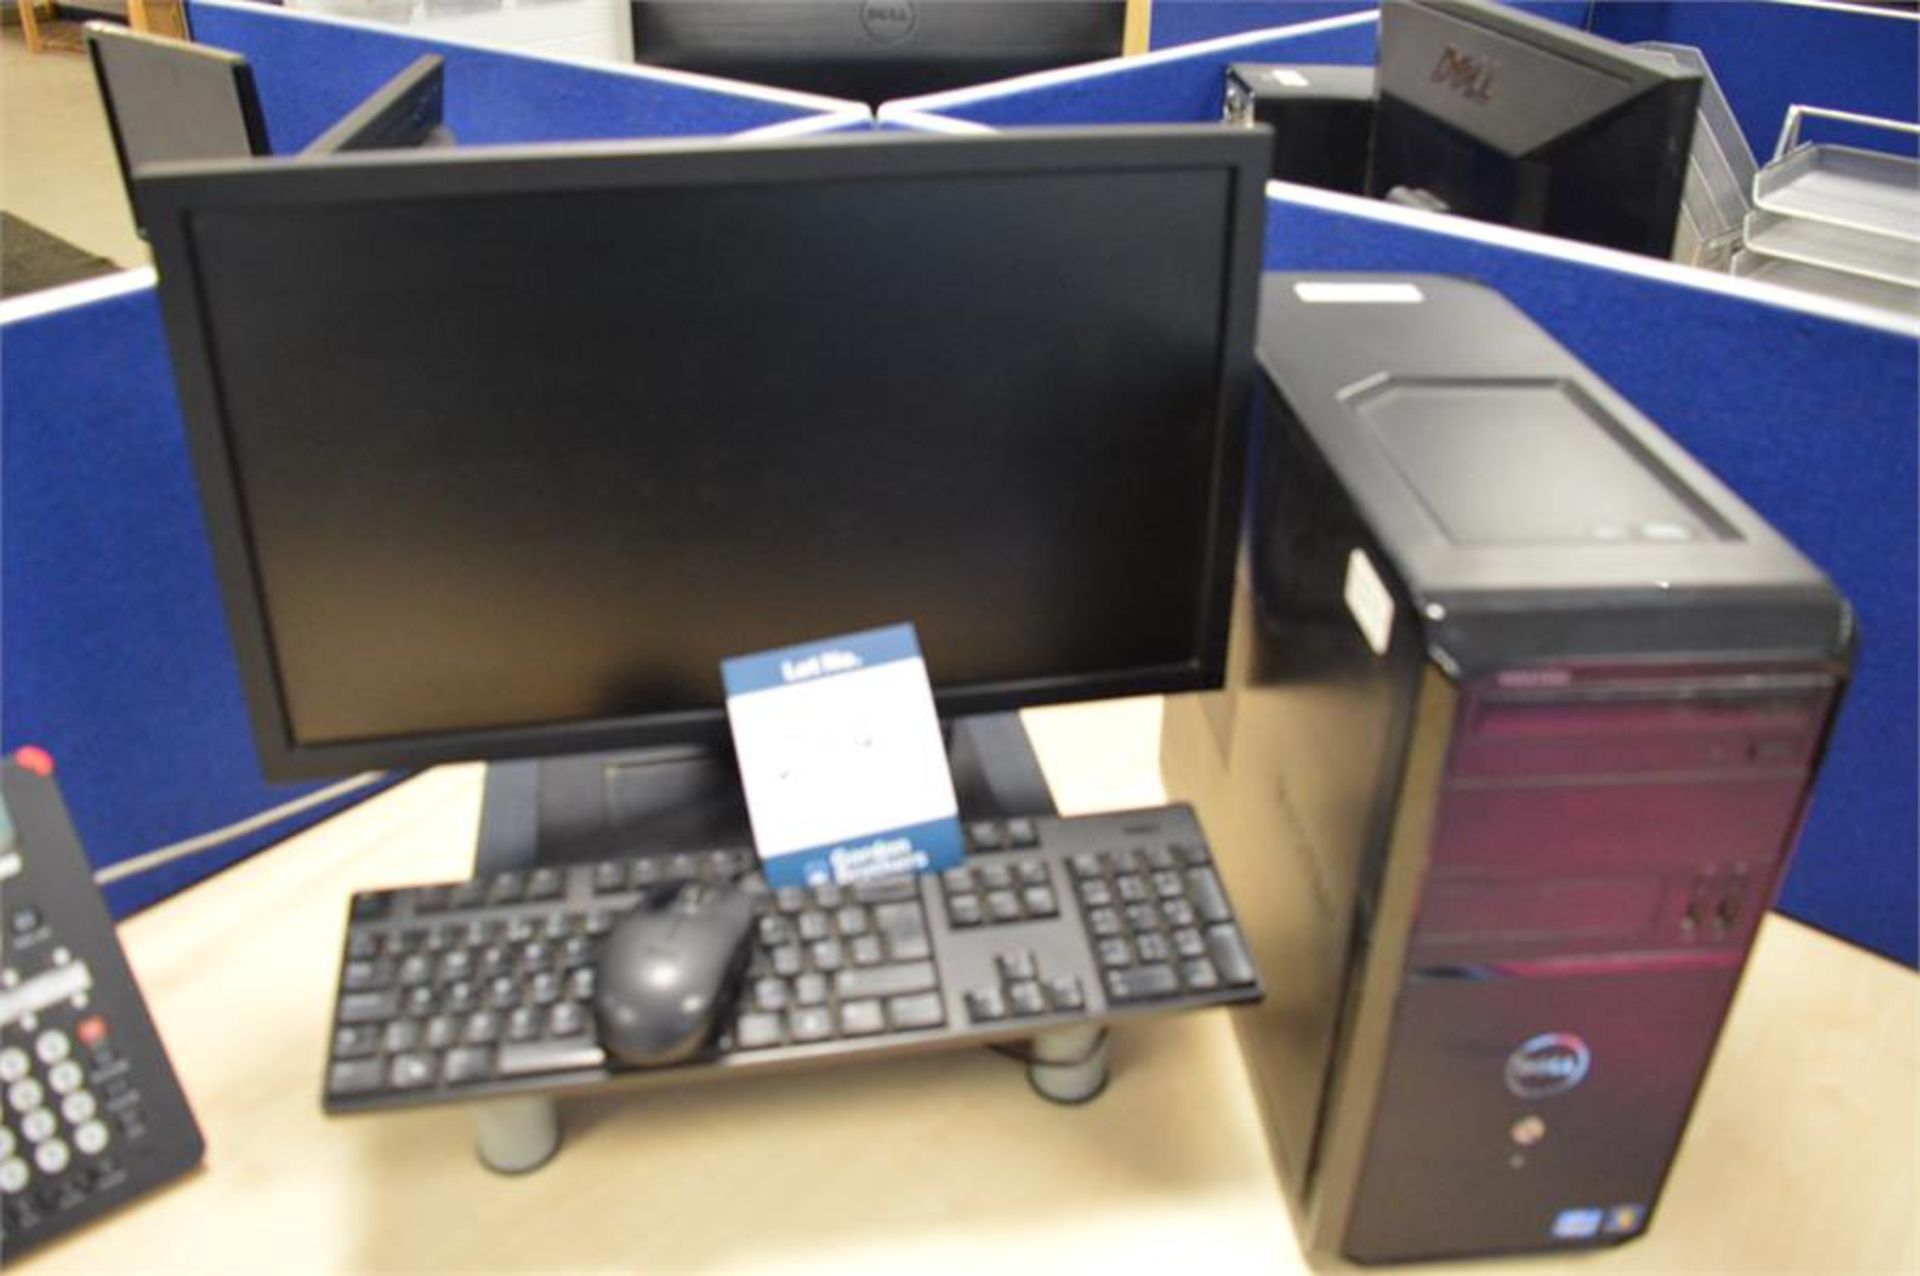 Dell, Vostro Core i3 PC with Dell flat screen monitor, keyboard and mouse